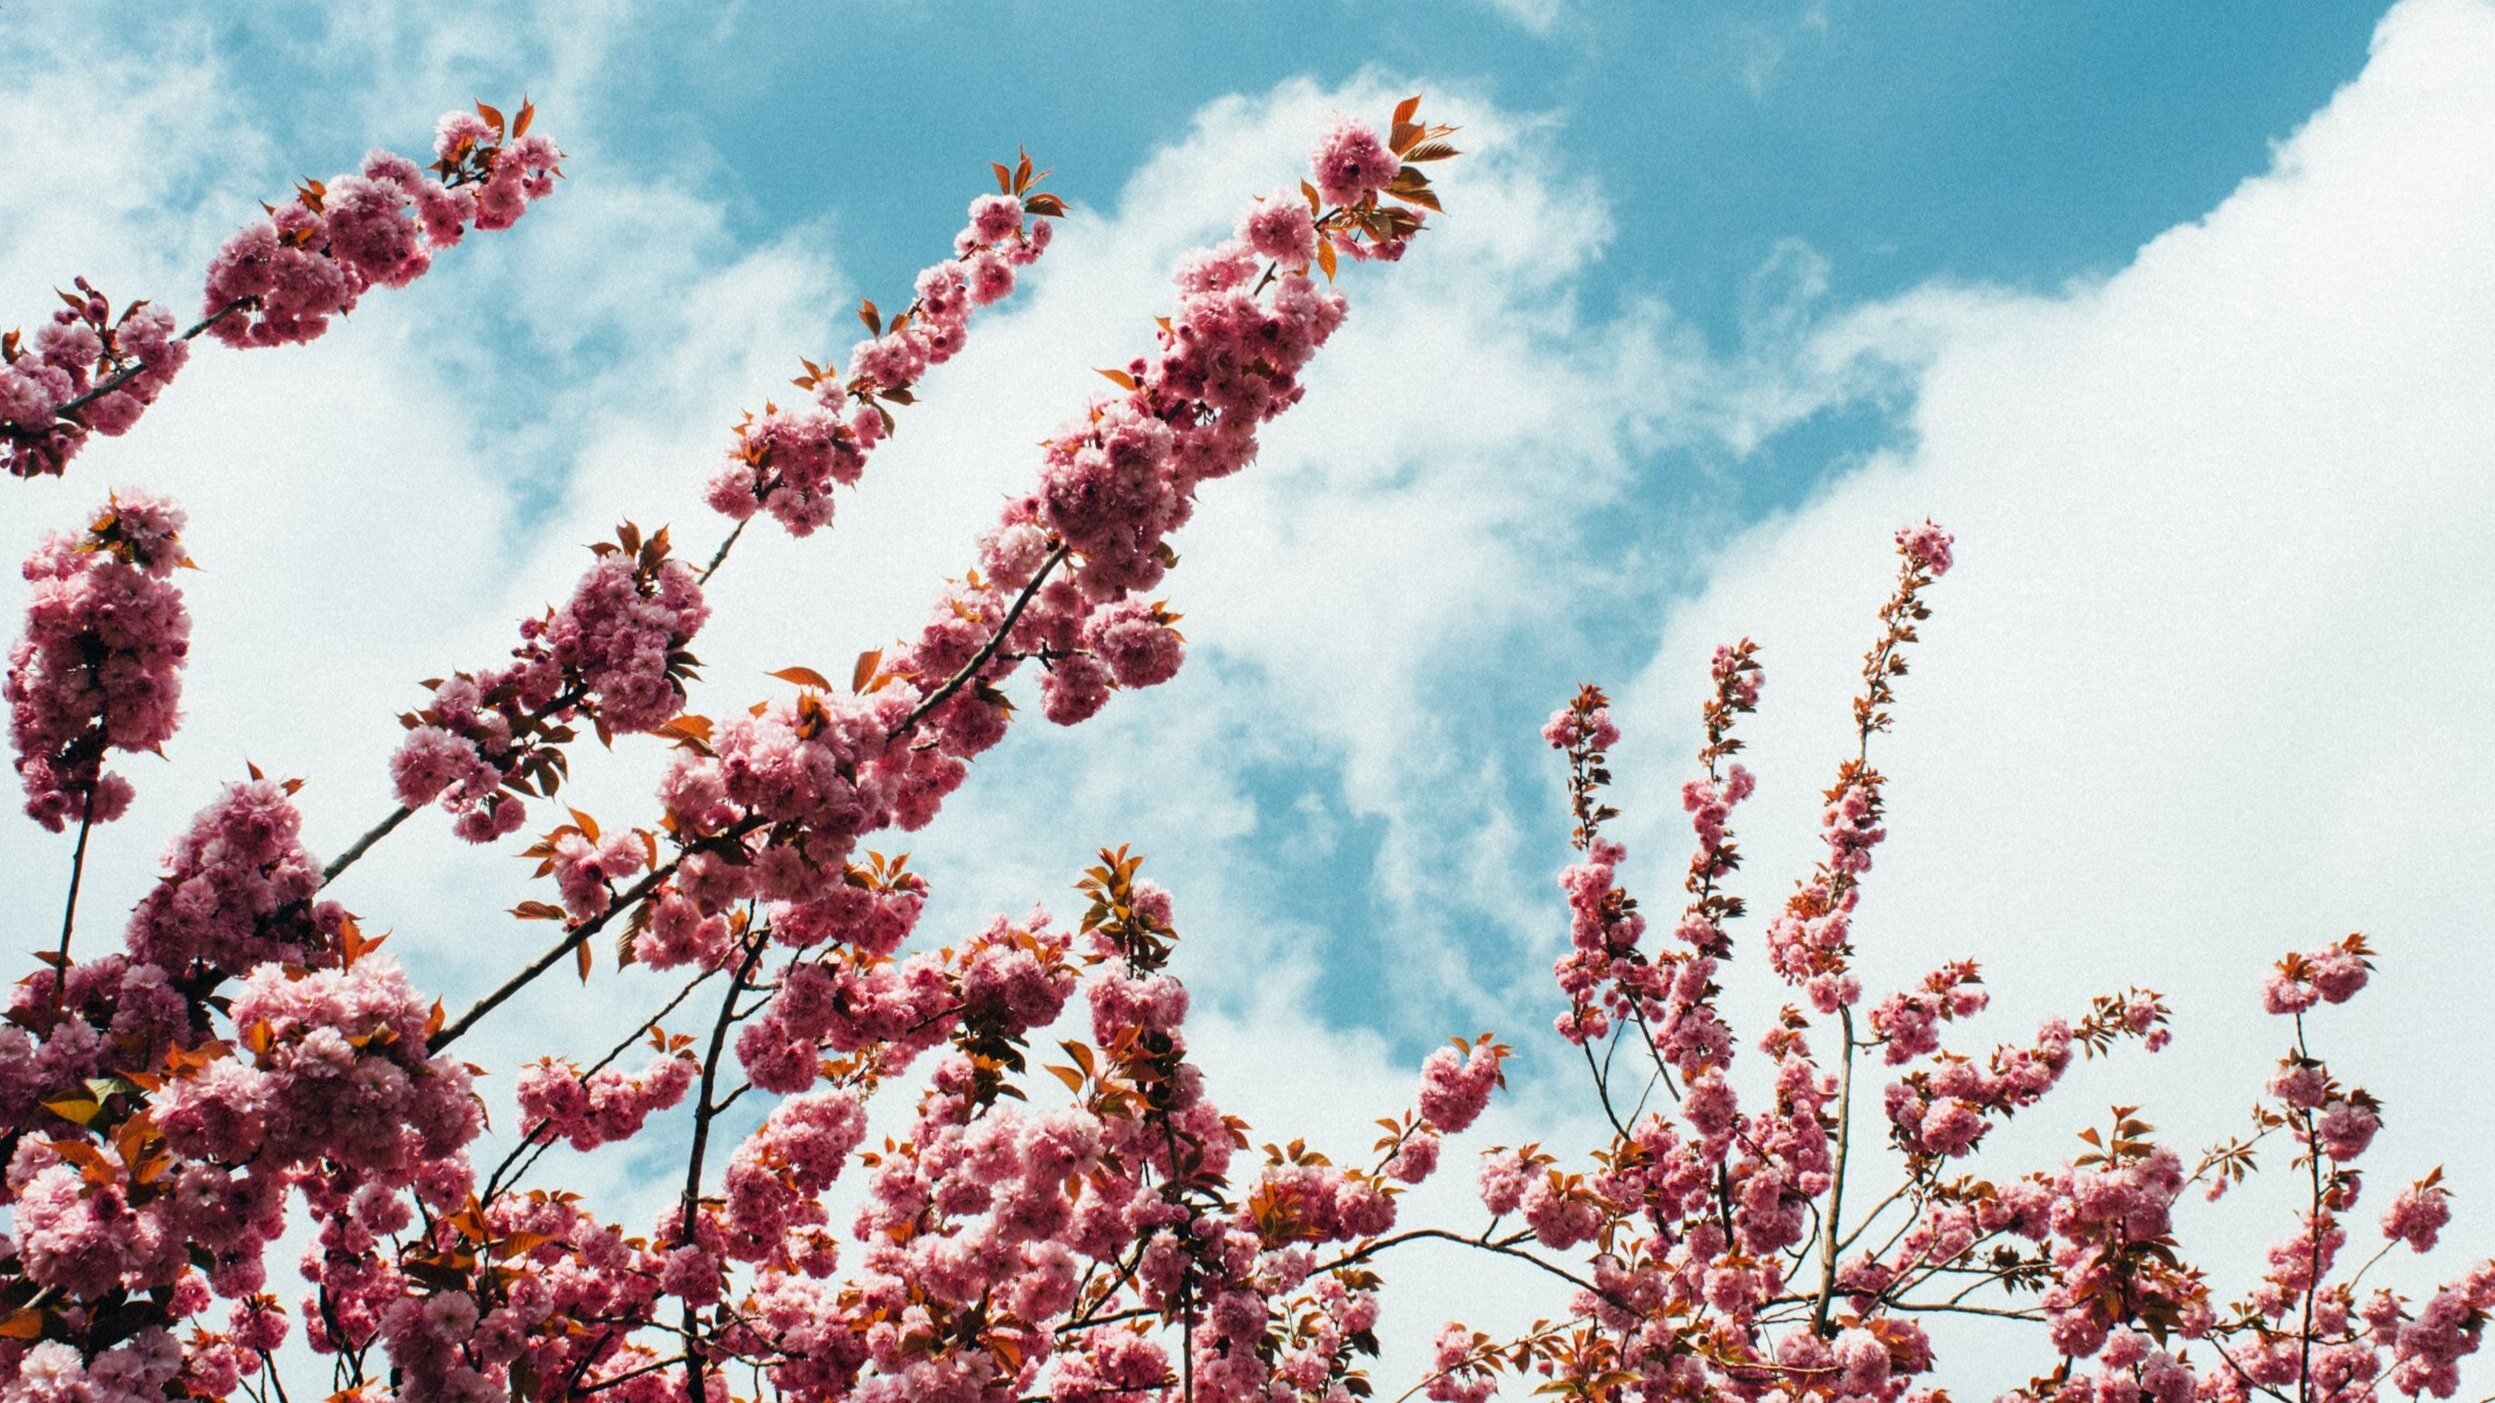  Photo of pink tree blossoms against a blue sky with clouds. 